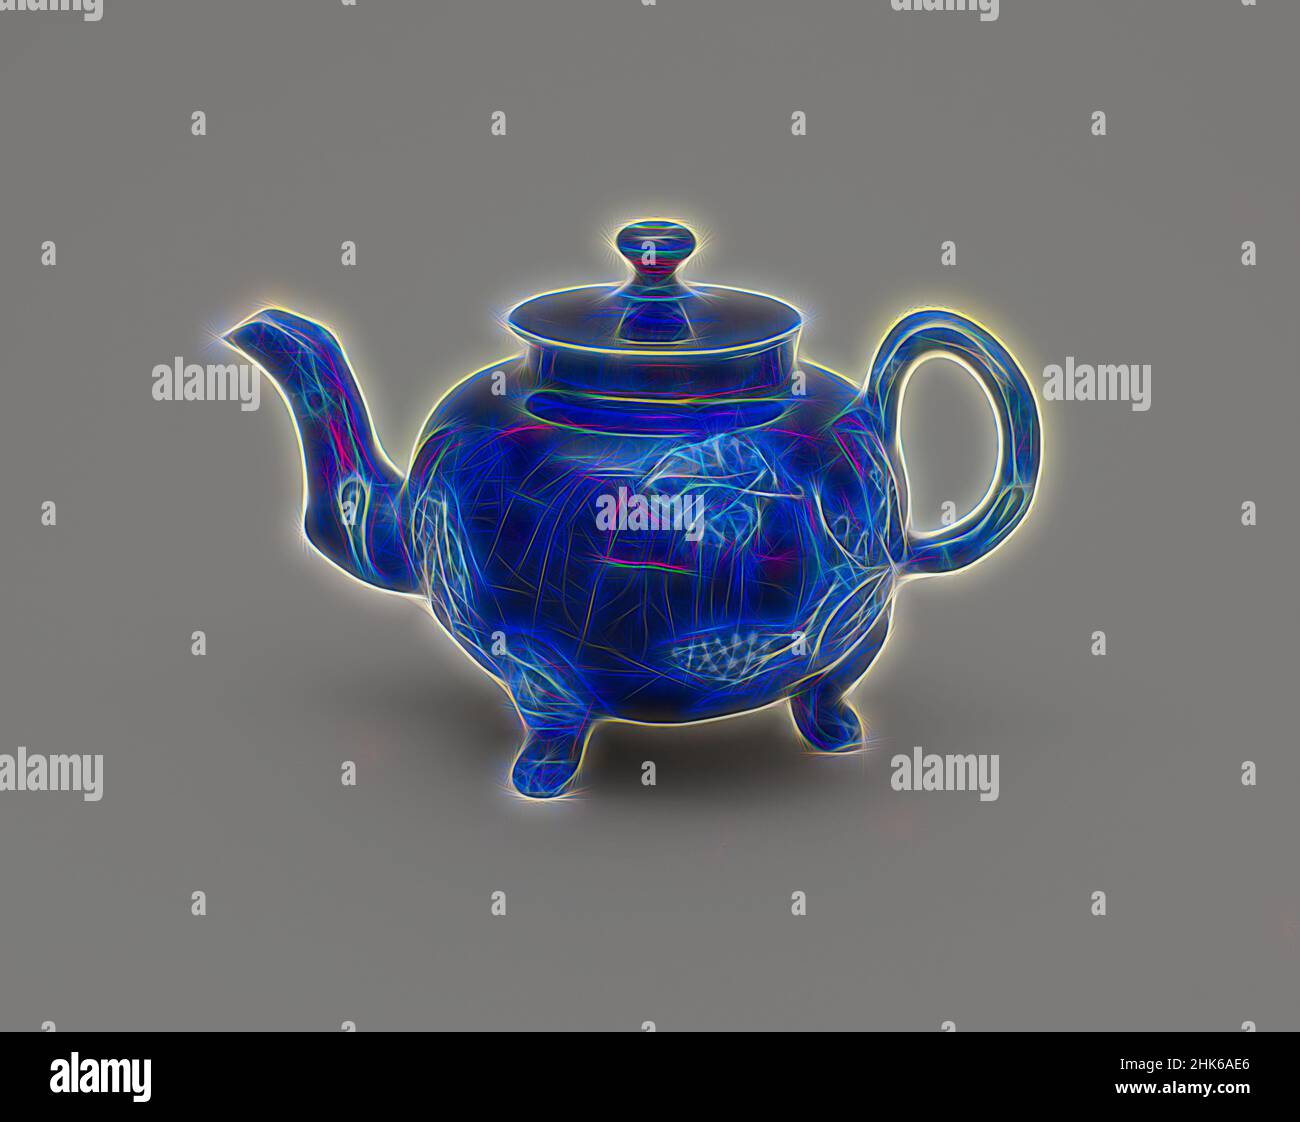 https://c8.alamy.com/comp/2HK6AE6/inspired-by-teapot-english-175065-salt-glazed-stoneware-with-cobalt-blue-slip-made-in-staffordshire-england-europe-ceramics-containers-3-78-6-3-34-in-98-152-95-cm-reimagined-by-artotop-classic-art-reinvented-with-a-modern-twist-design-of-warm-cheerful-glowing-of-brightness-and-light-ray-radiance-photography-inspired-by-surrealism-and-futurism-embracing-dynamic-energy-of-modern-technology-movement-speed-and-revolutionize-culture-2HK6AE6.jpg